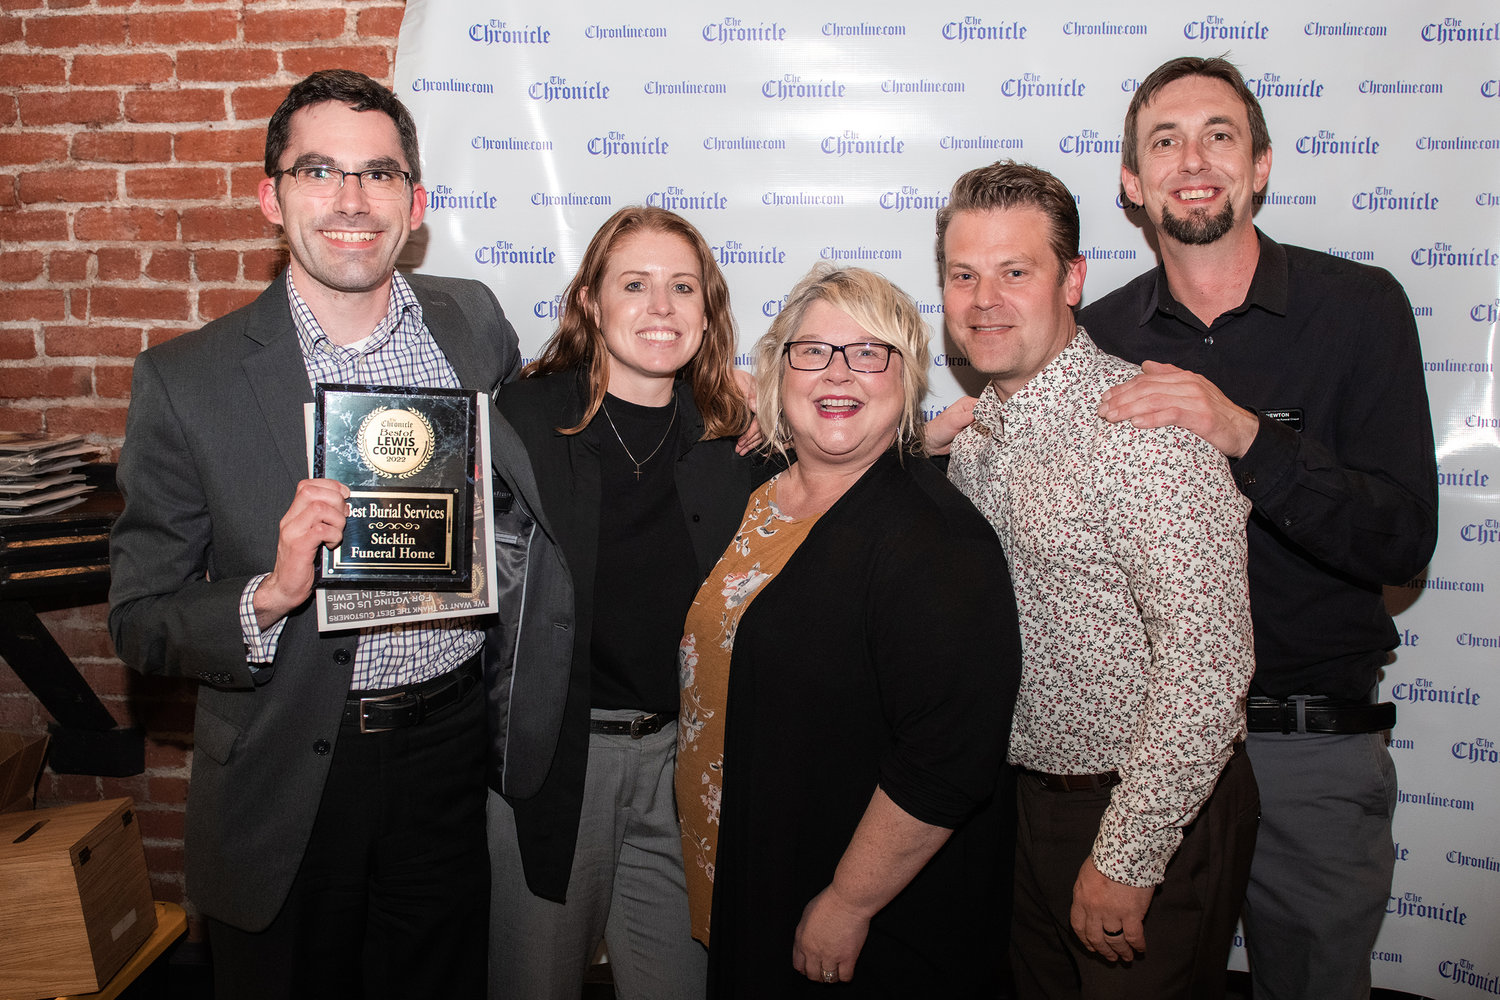 Sticklin Funeral Home won “Best Burial Service” during the 2022 Best of Lewis County event hosted by The Chronicle at The Juice Box Thursday evening in Centralia.